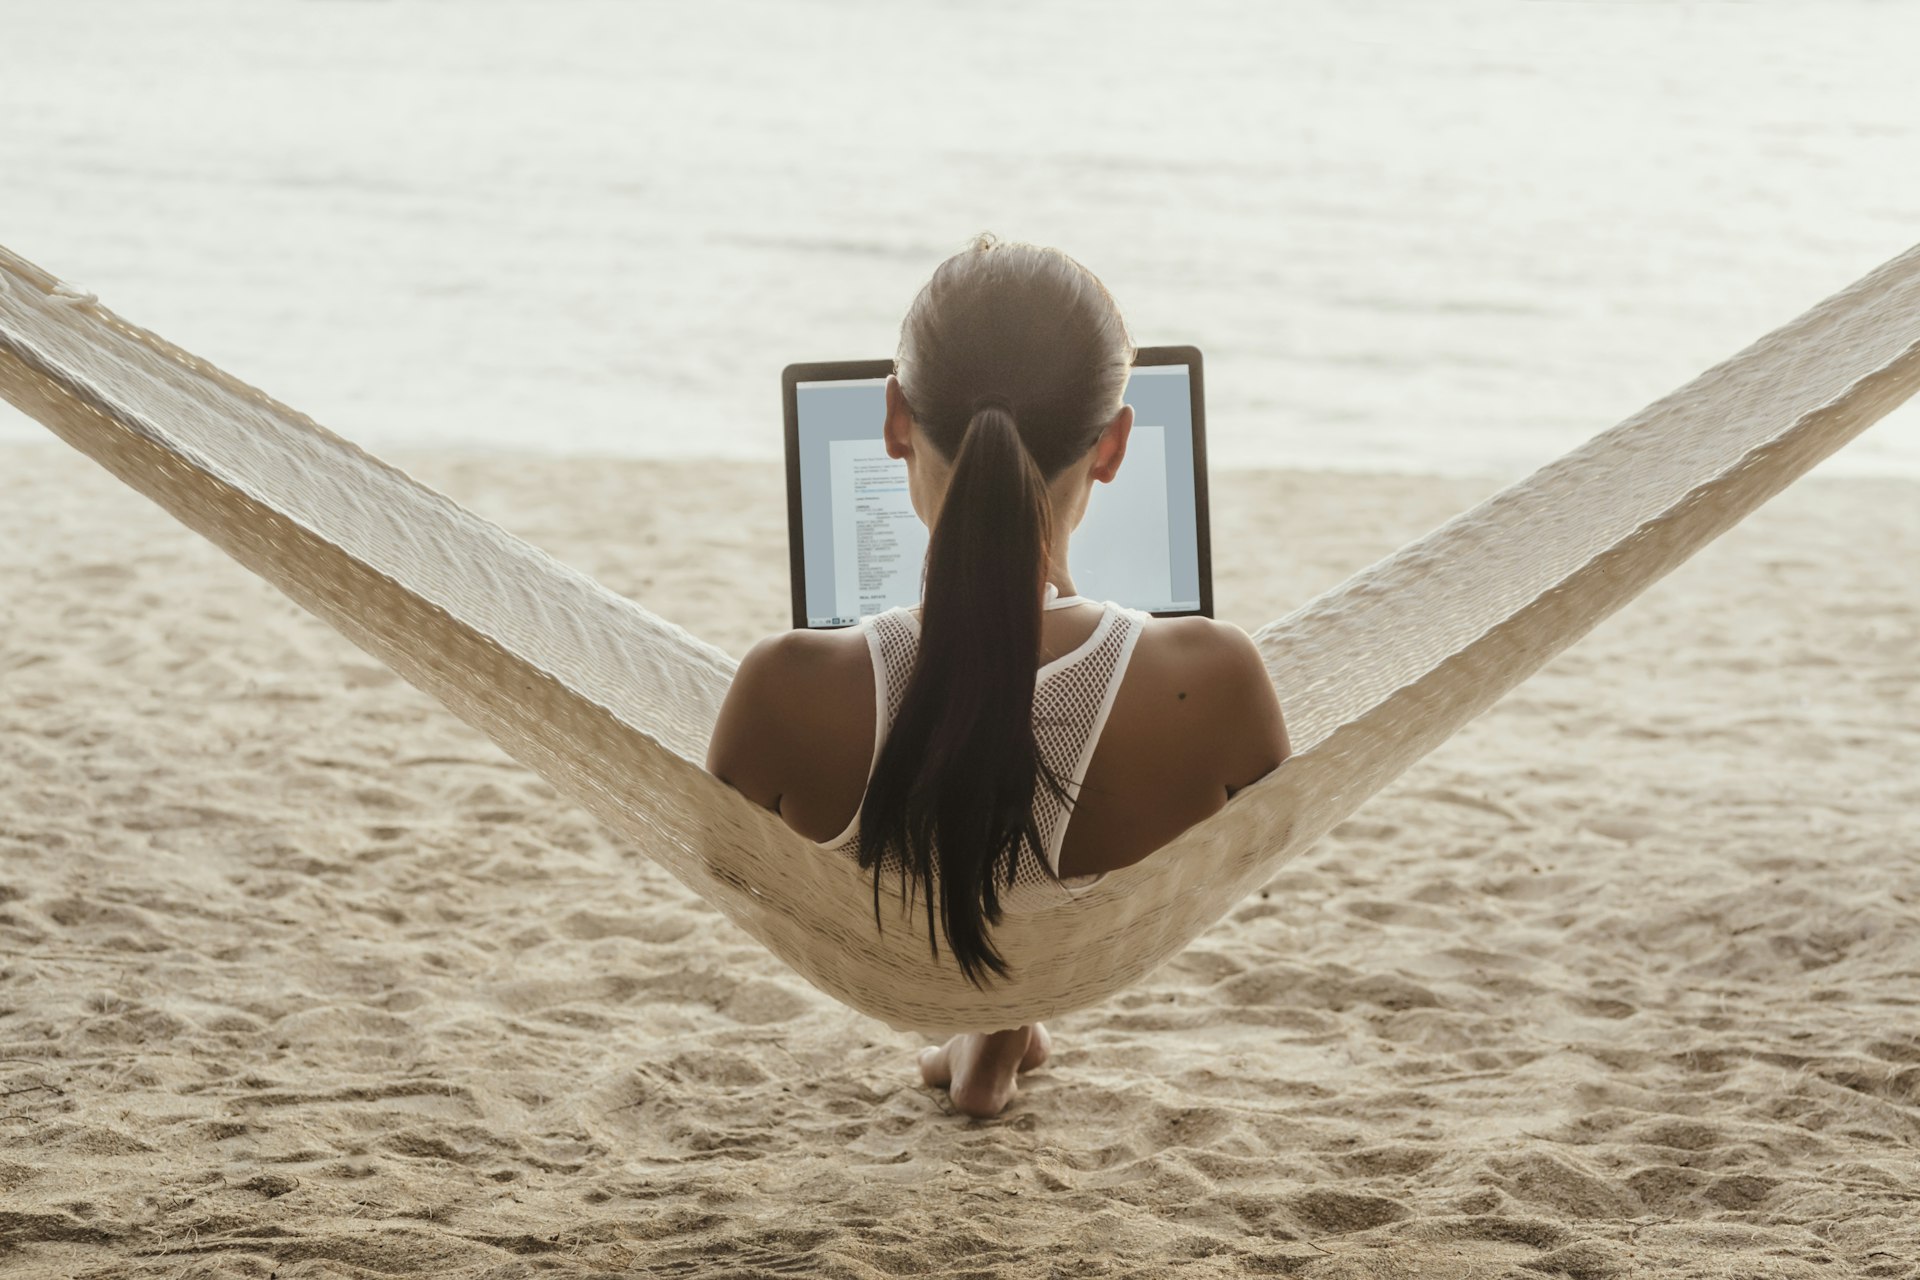 View from behind a person relaxing in a hammock with a laptop open, overlooking a sandy beach.